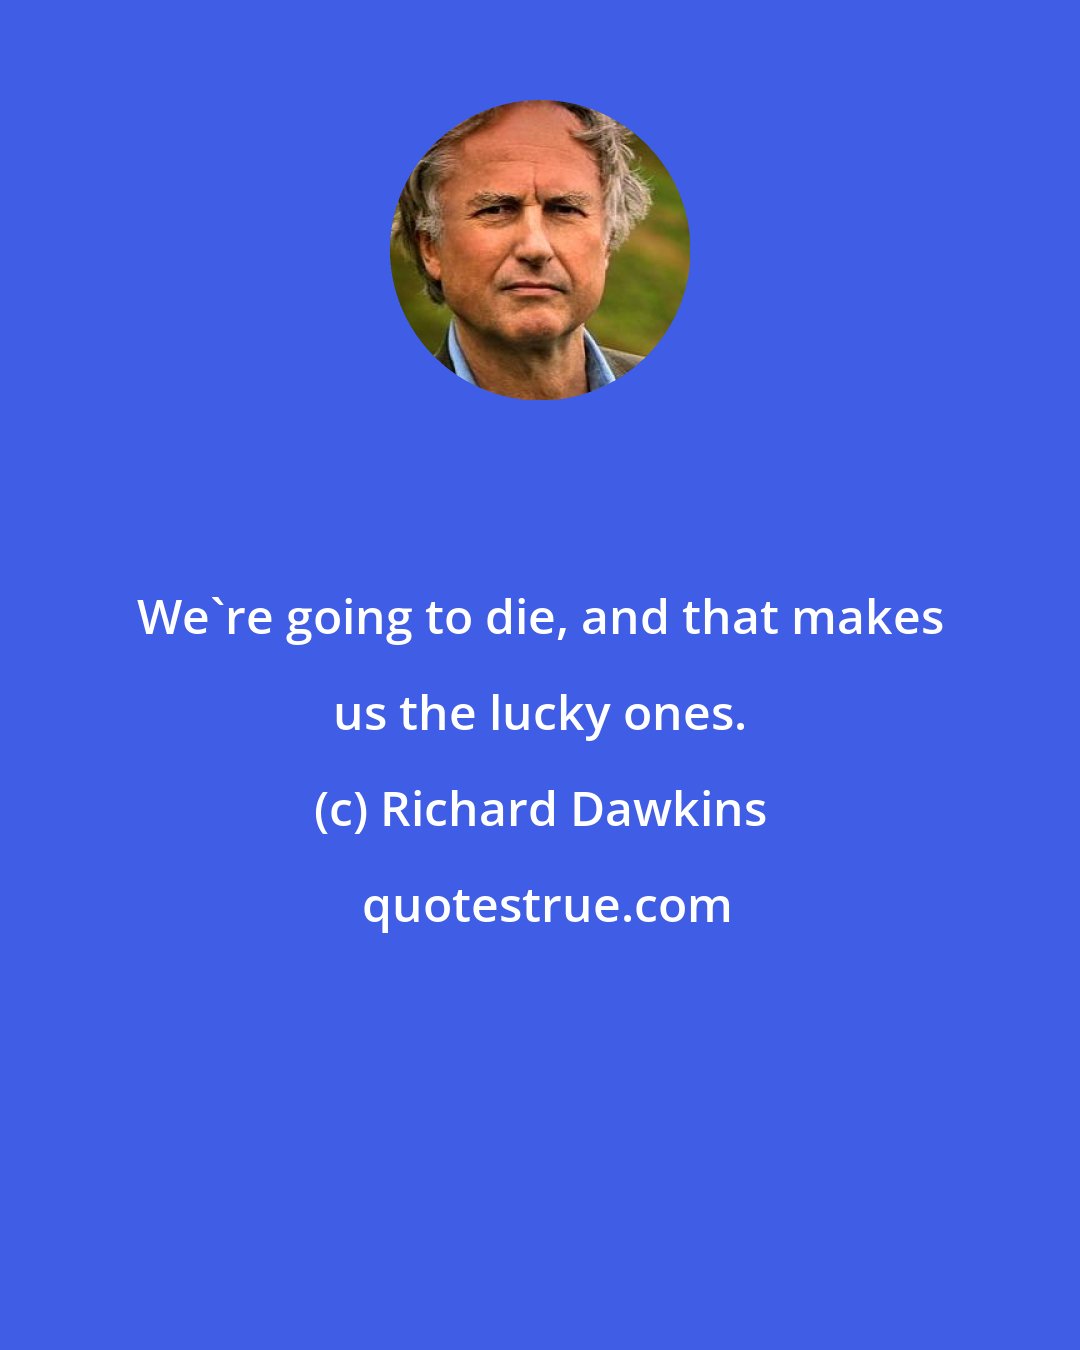 Richard Dawkins: We're going to die, and that makes us the lucky ones.